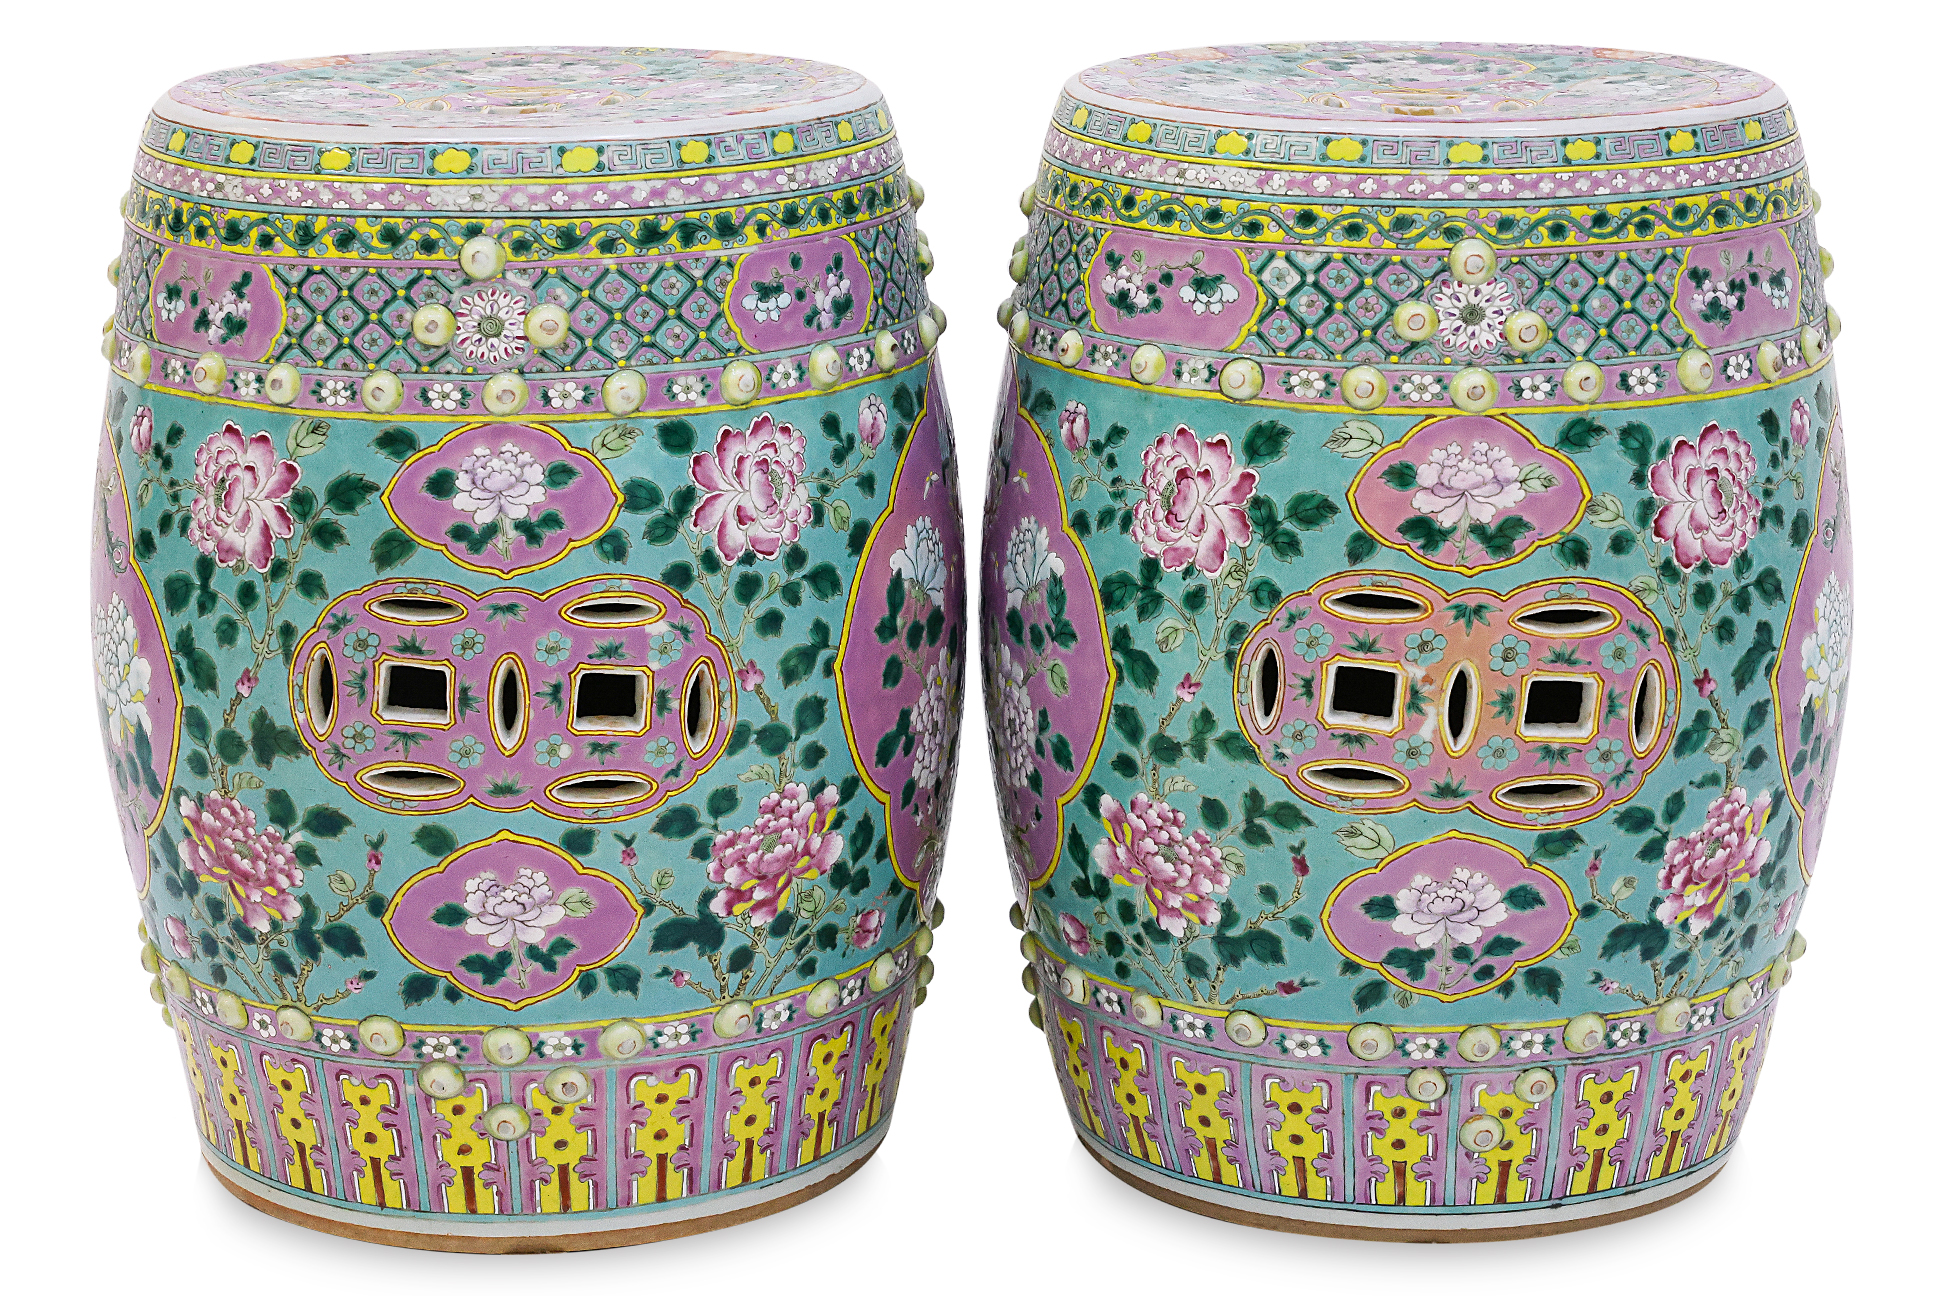 AN OPPOSING OR MIRRORED PAIR OF FAMILLE ROSE PORCELAIN DRUM STOOLS - Image 2 of 4